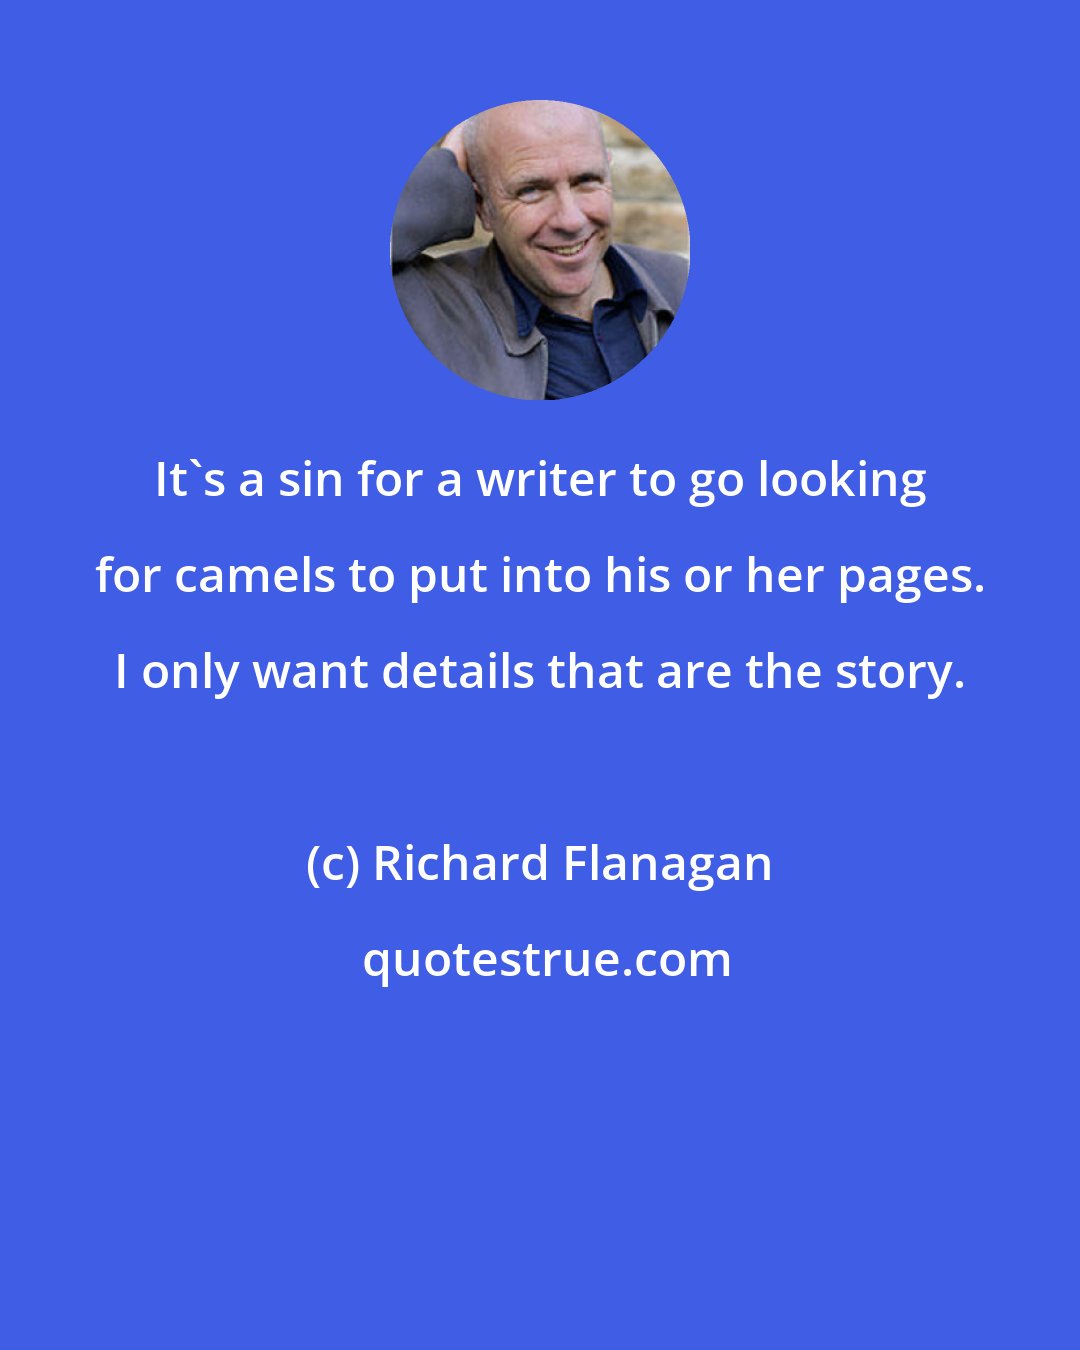 Richard Flanagan: It's a sin for a writer to go looking for camels to put into his or her pages. I only want details that are the story.